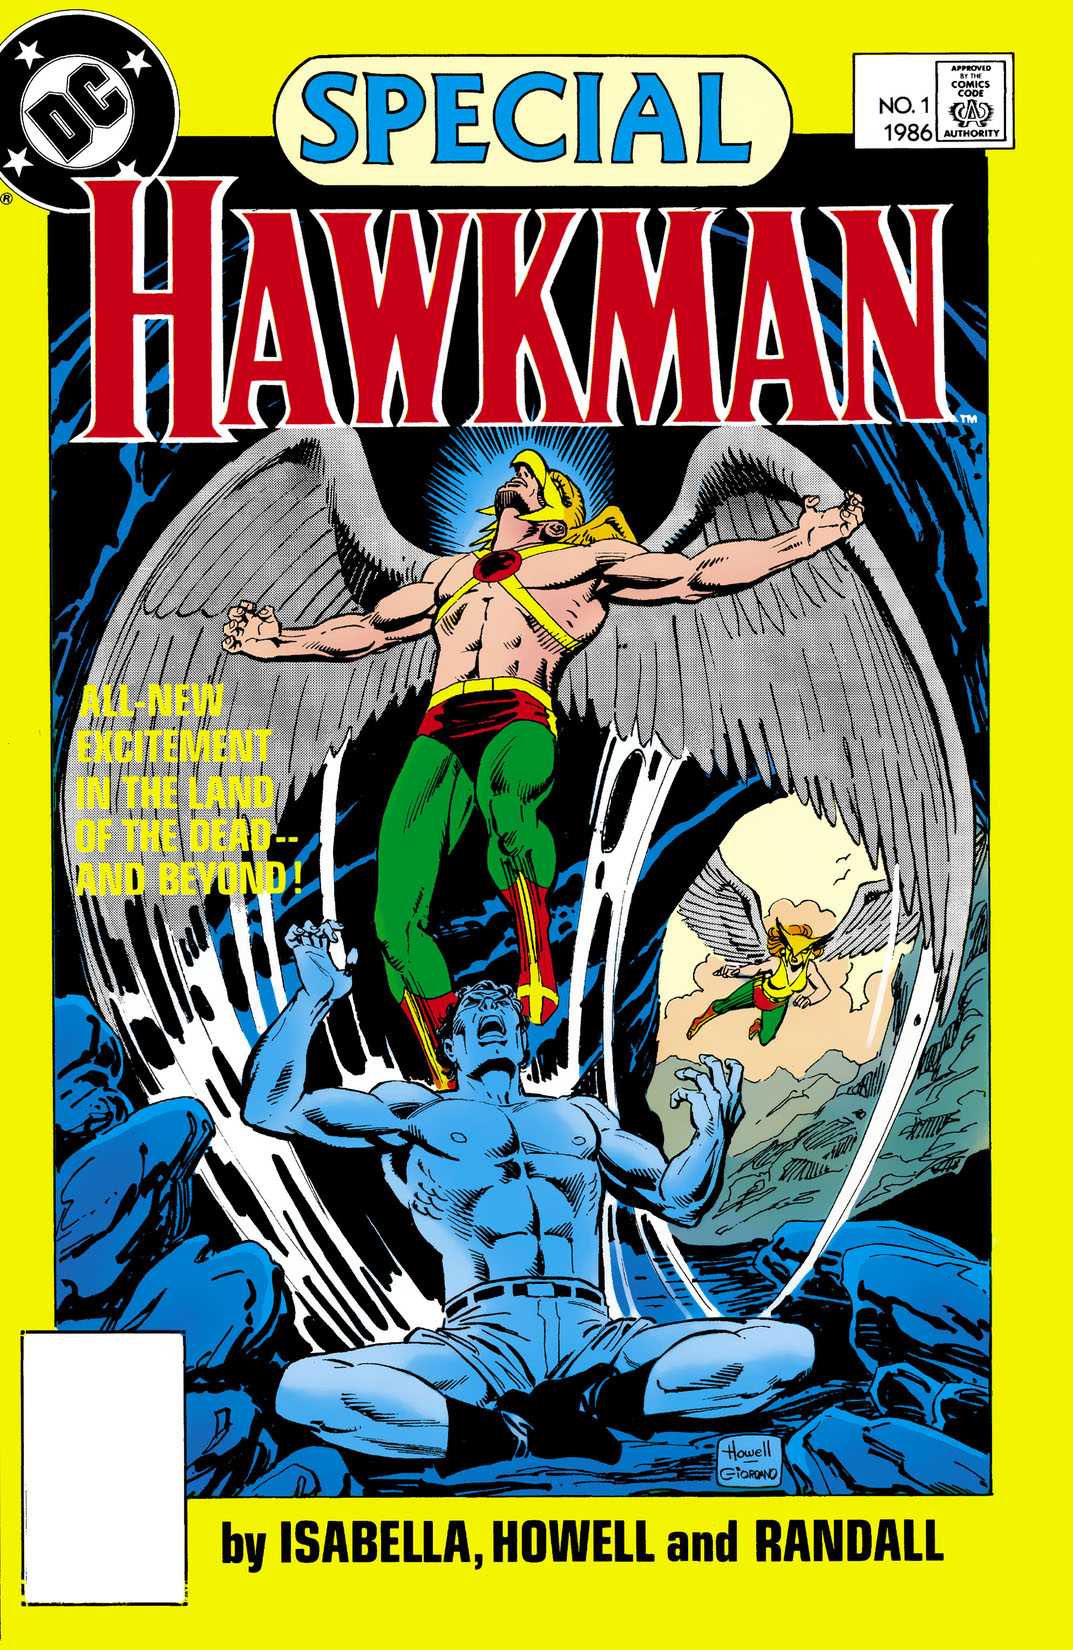 Hawkman Special (1986-1986) #1 preview images